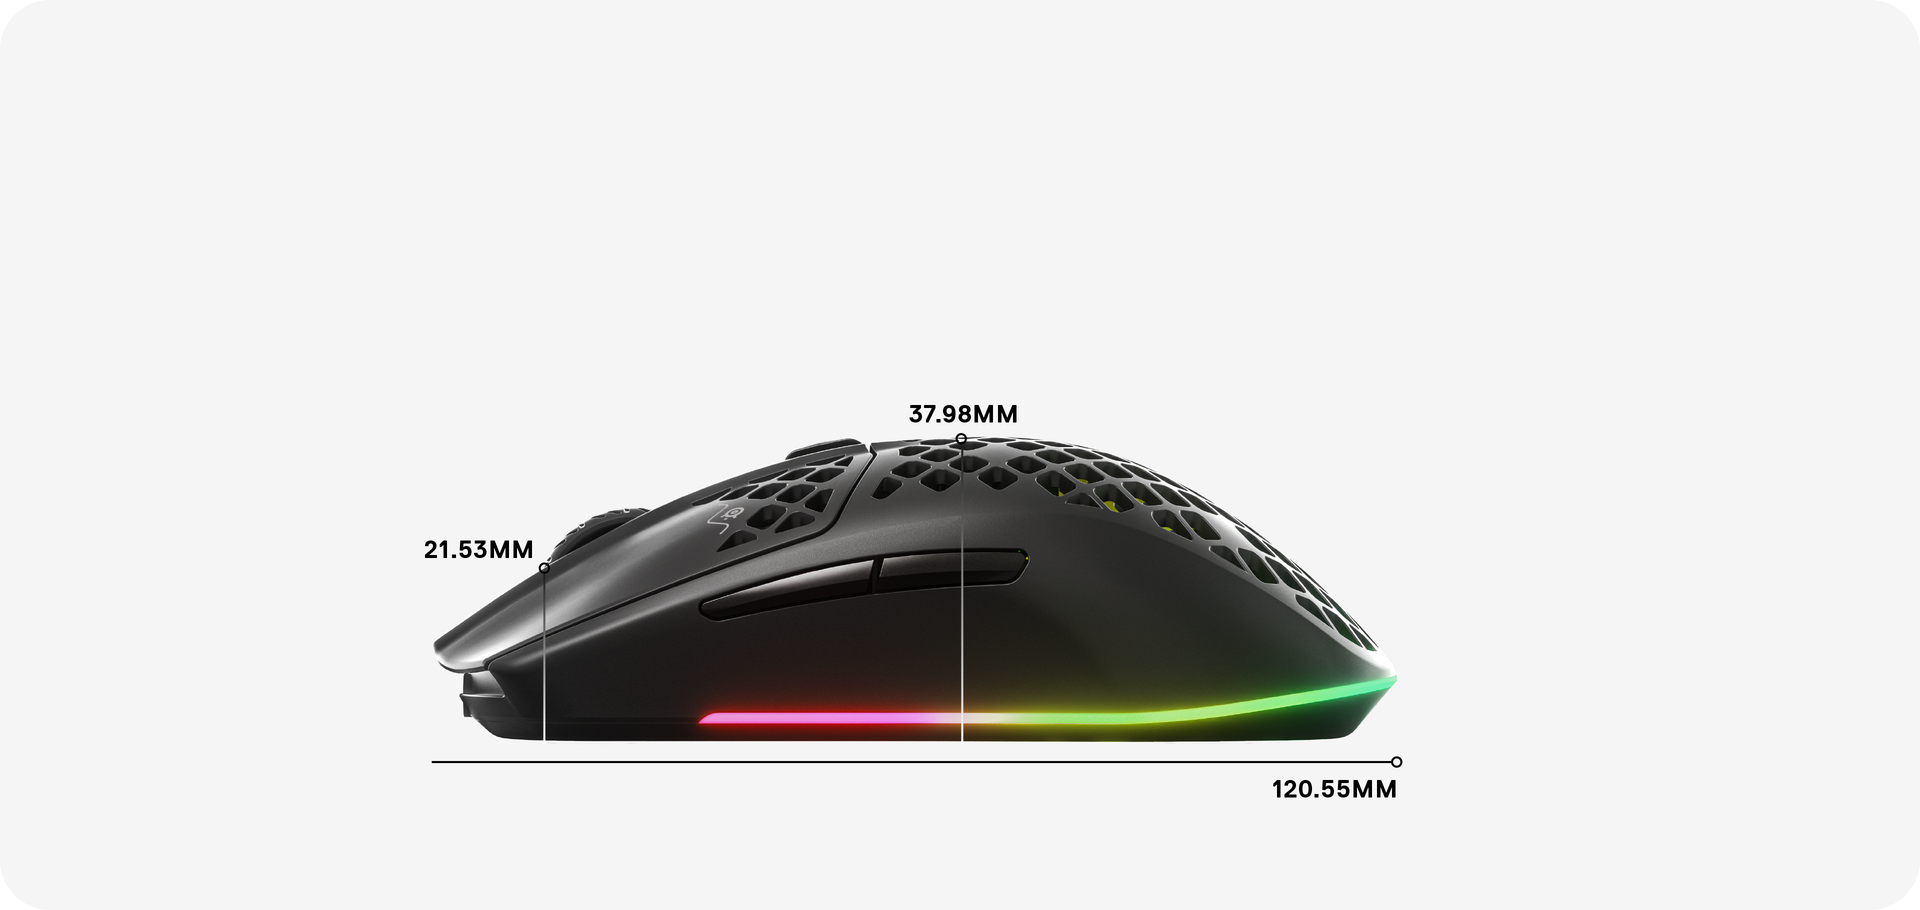 Dimensions for the mouse: 120.55 MM in length, 37.98 MM from palm rest to base, and 21.53 MM from scroll wheel to base.